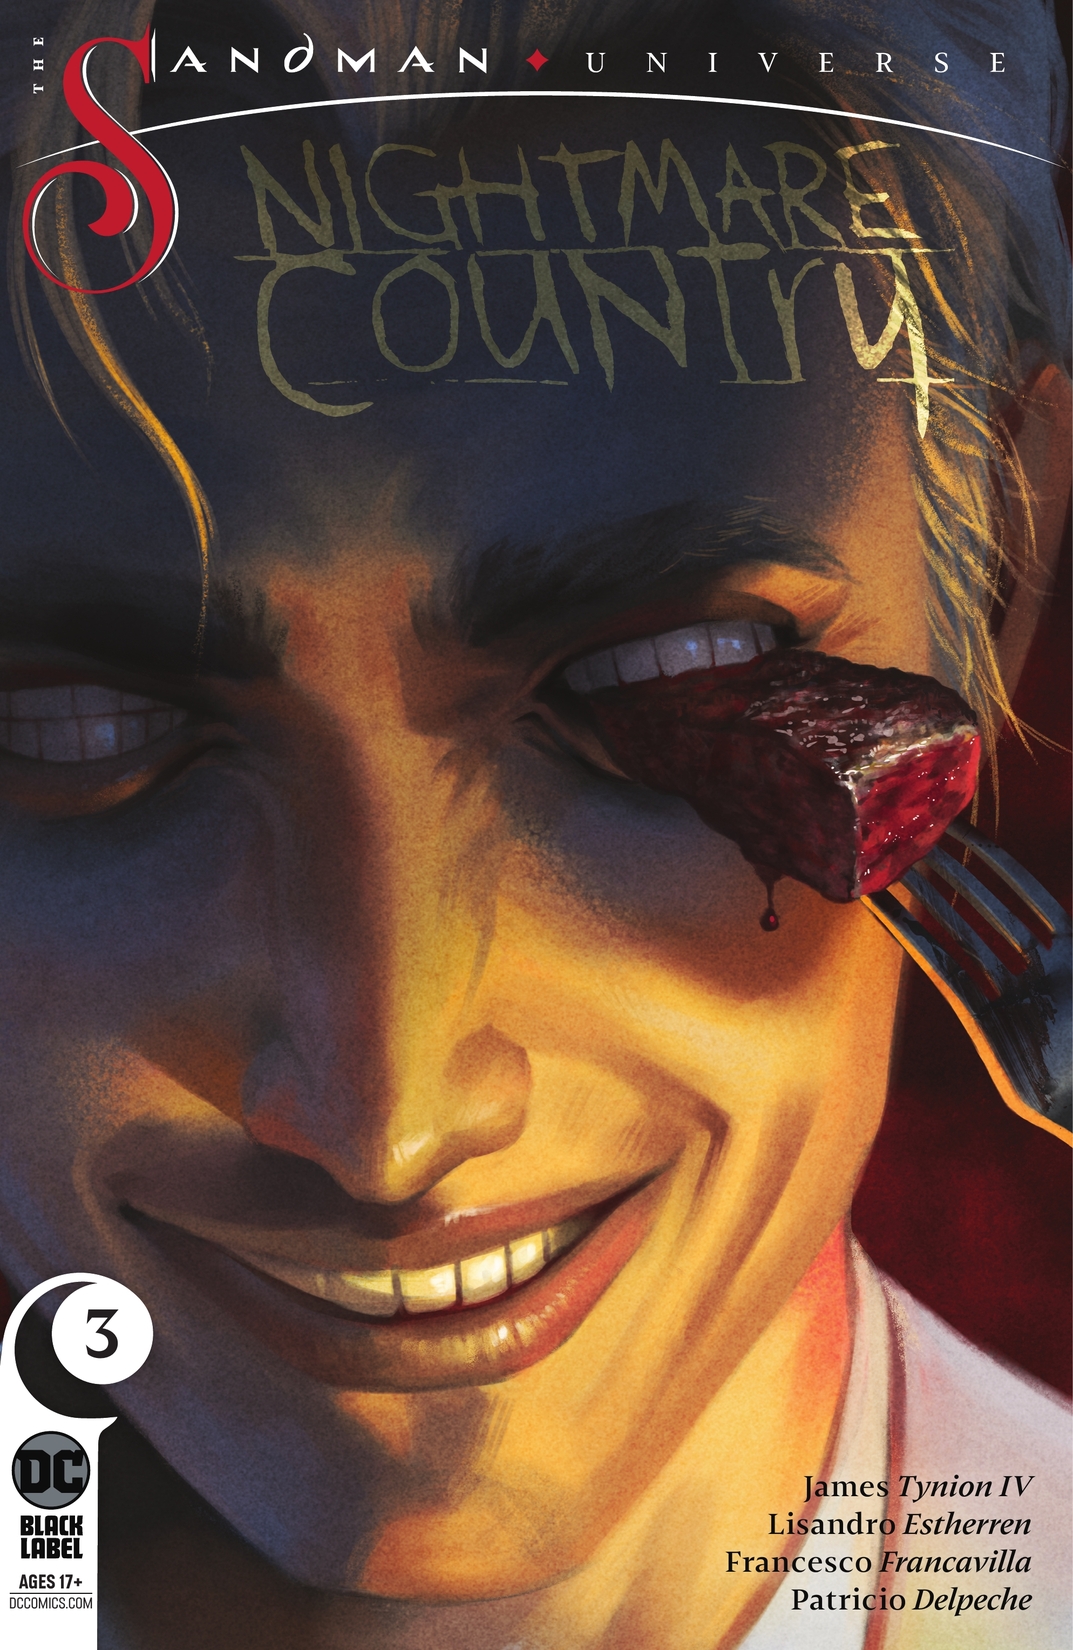 The Sandman Universe: Nightmare Country #3 preview images